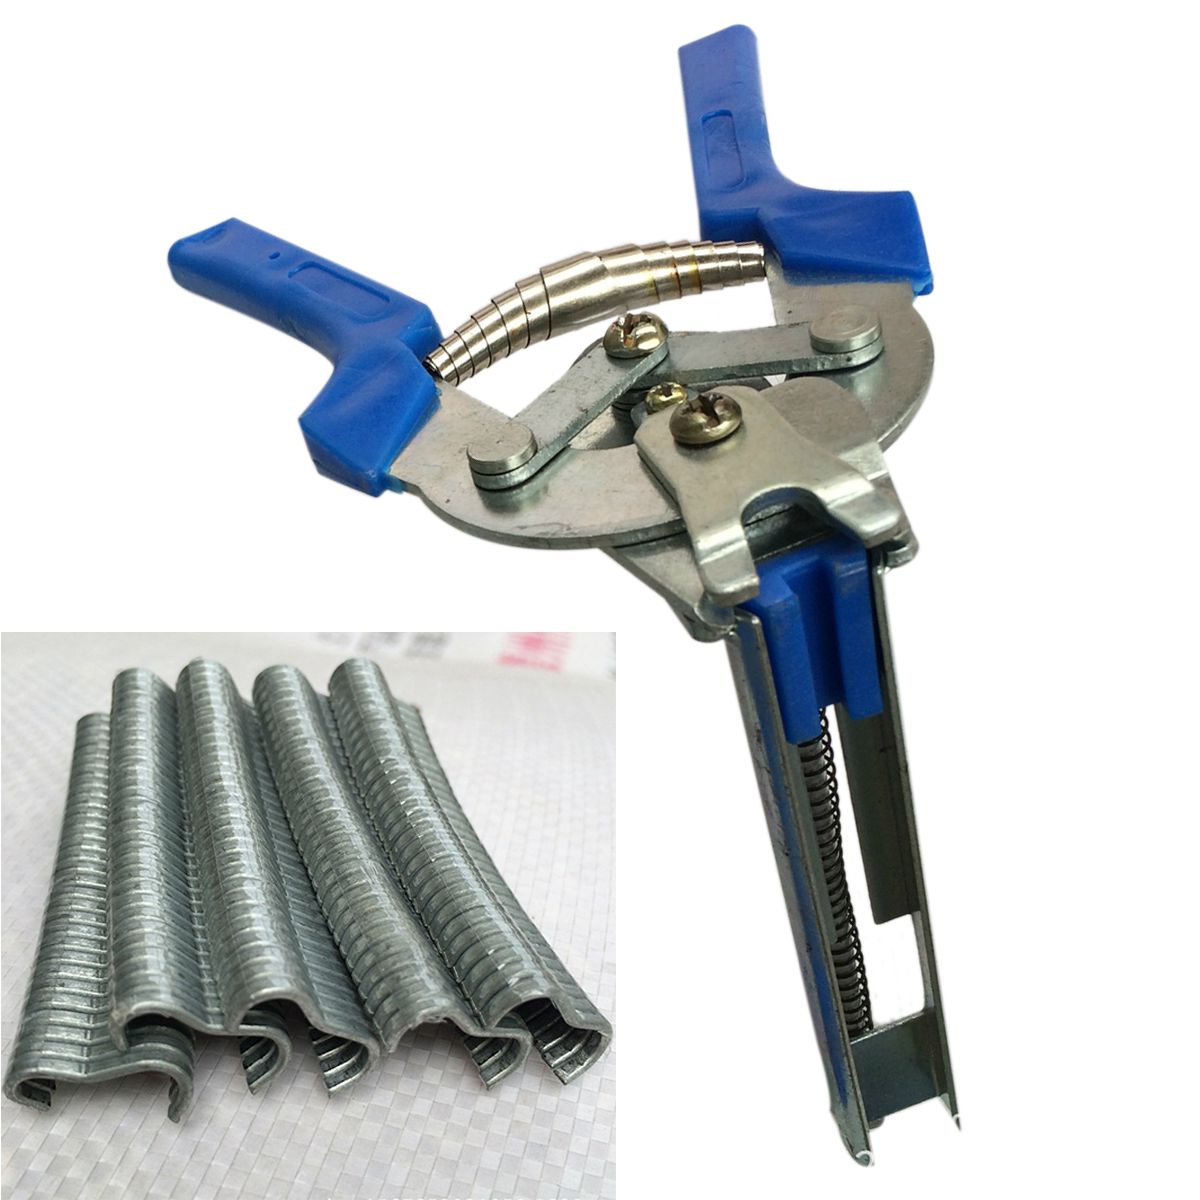 WSFS 1pc Hog Ring Plier Tool and 600pcs M Clips Chicken Mesh Cage Wire Fencing Crimping Solder Joint Welding Repair Hand Tools